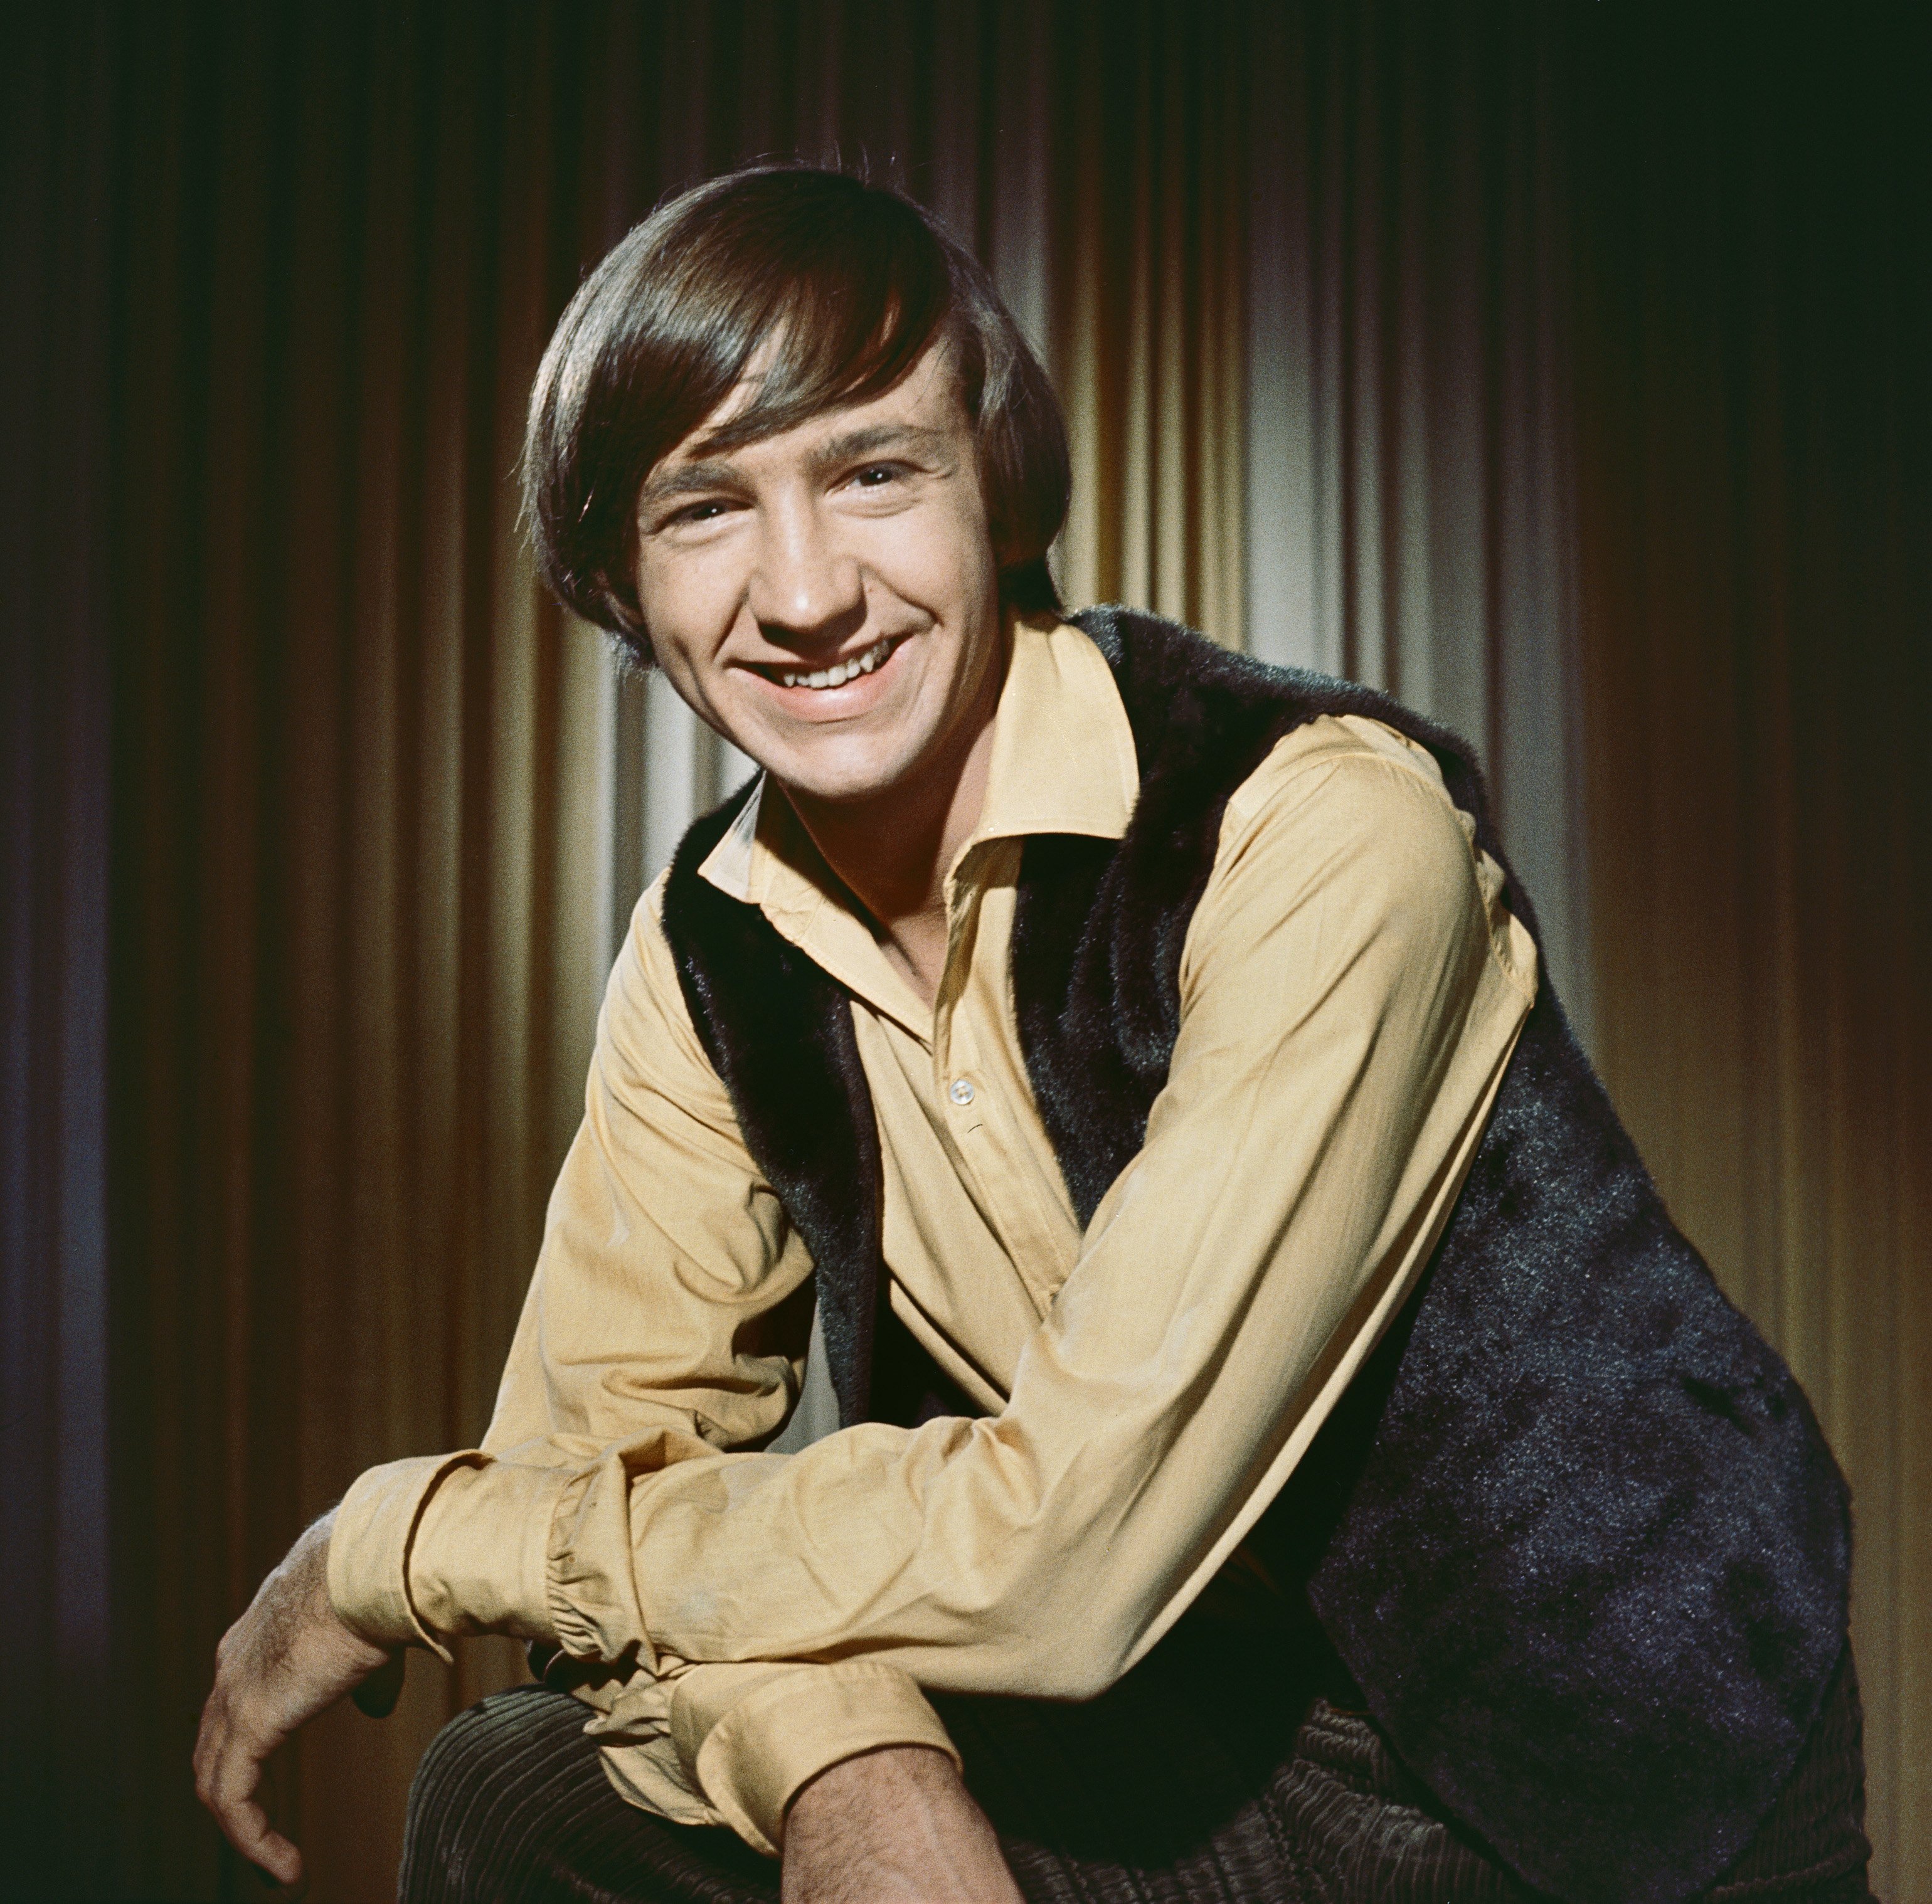 The Monkees' Peter Tork folding his arms